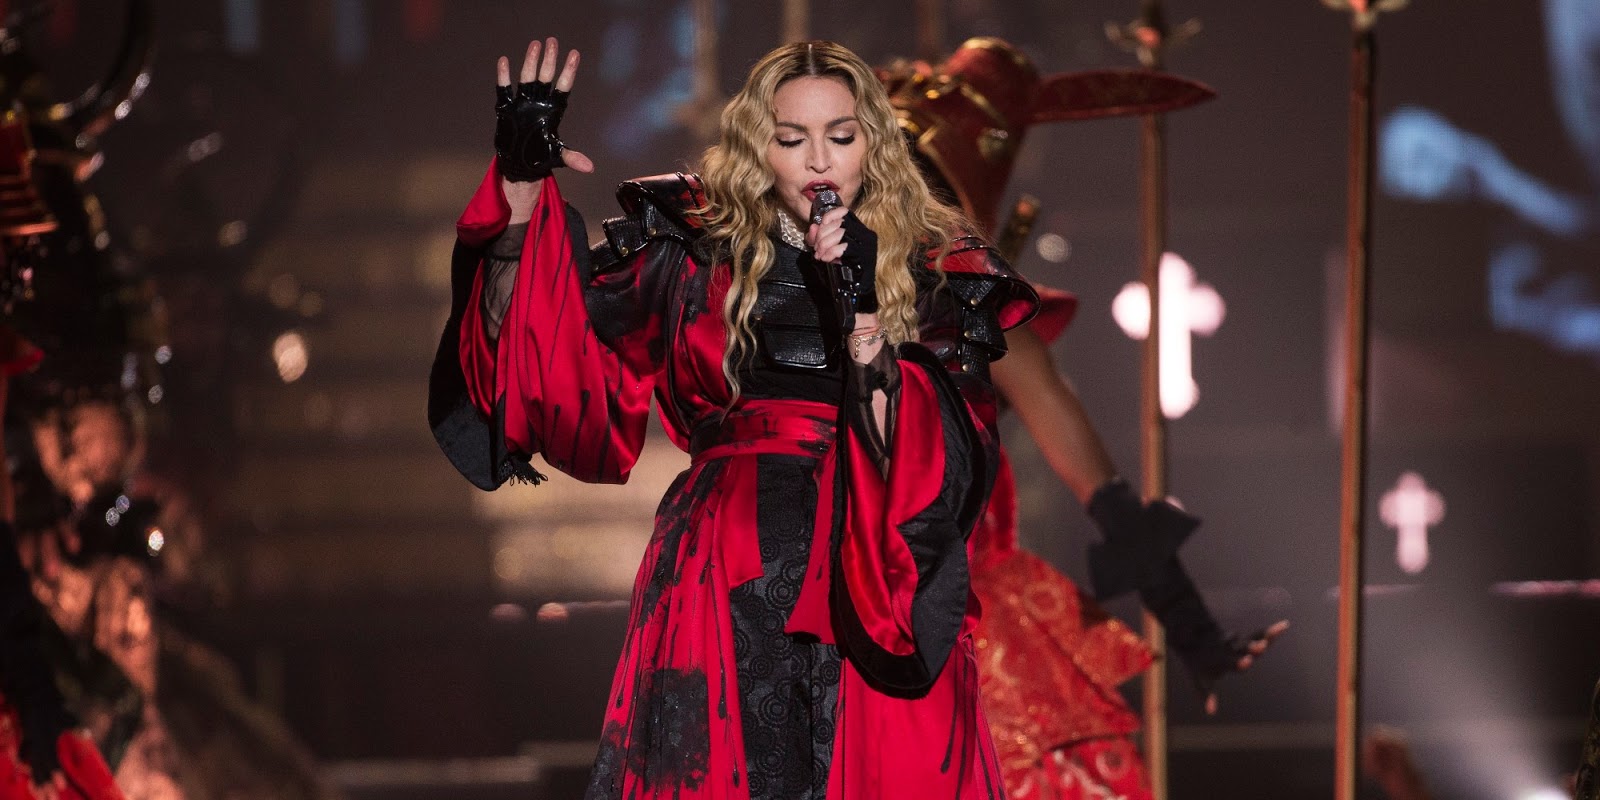 It’s official! Madonna will perform at Eurovision 2019 Grand Final!